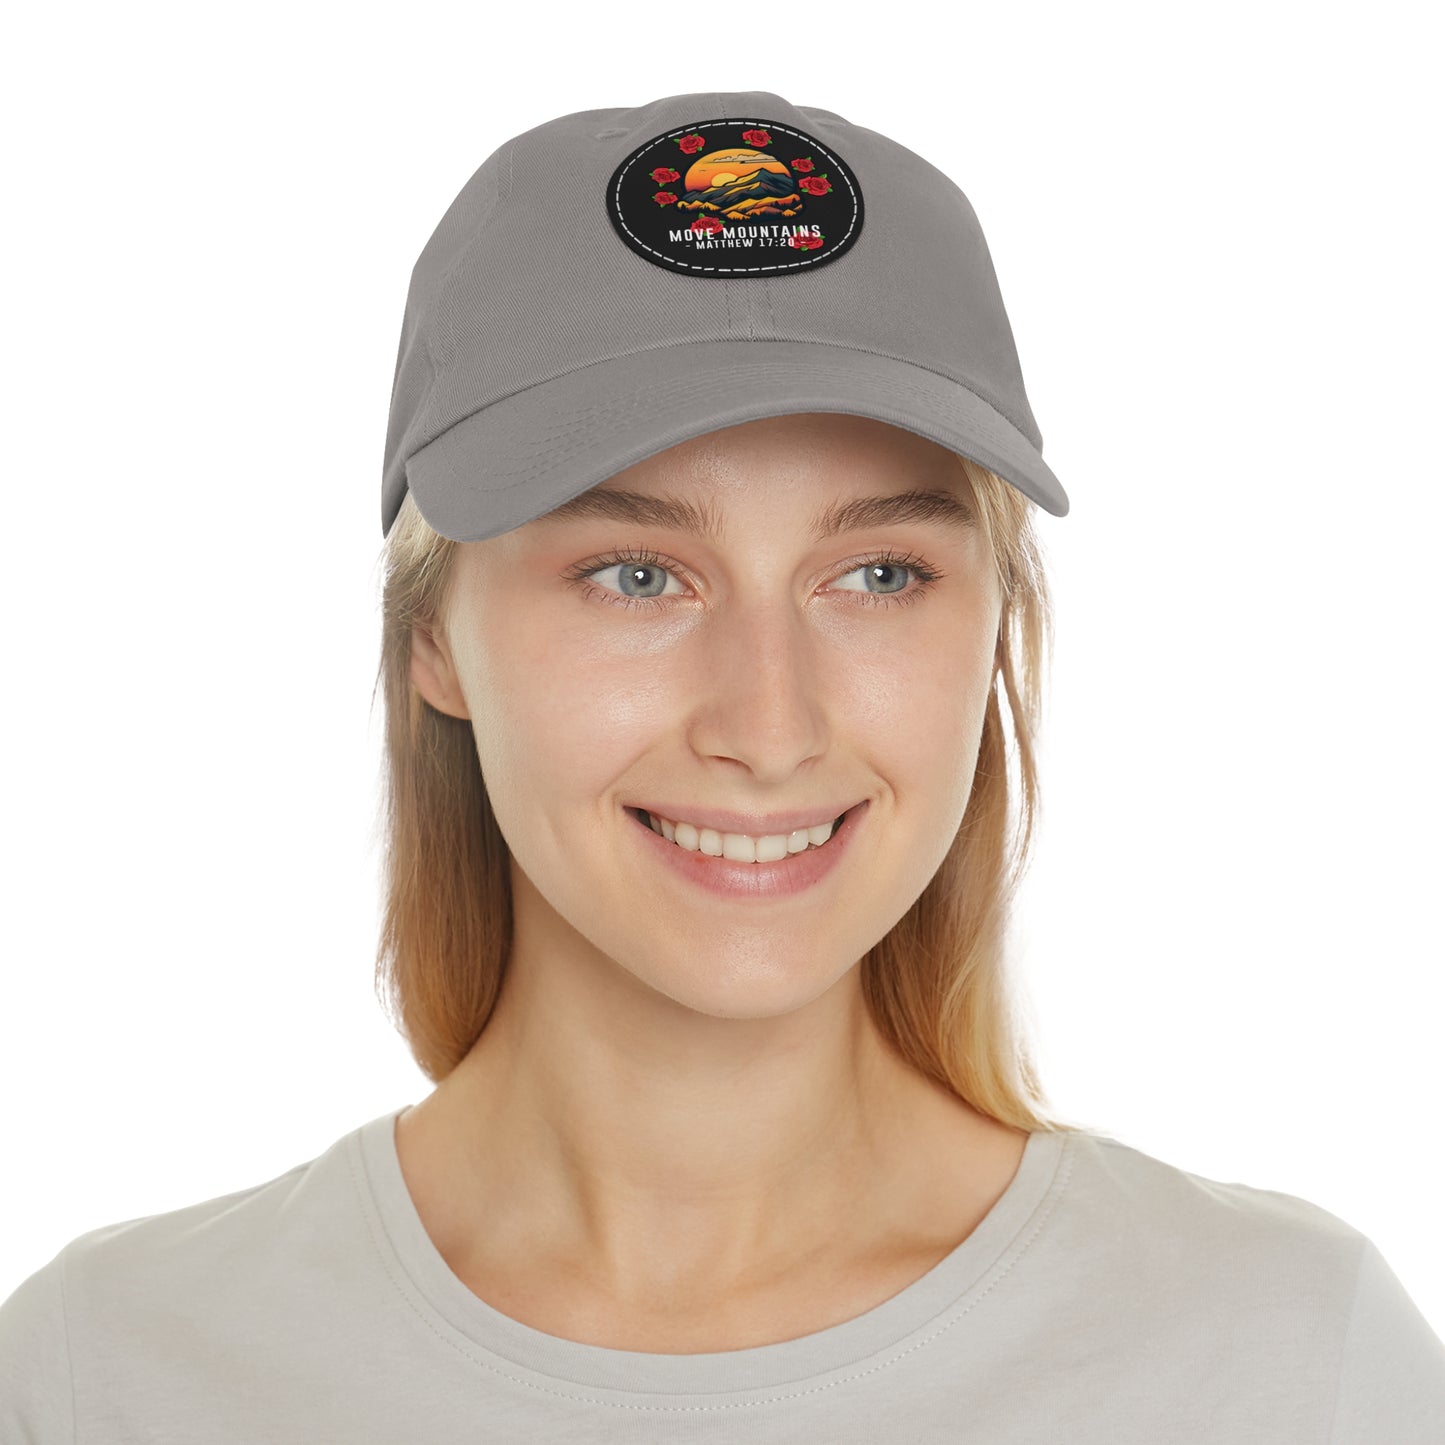 Mustard Seed Faith Patch Hat